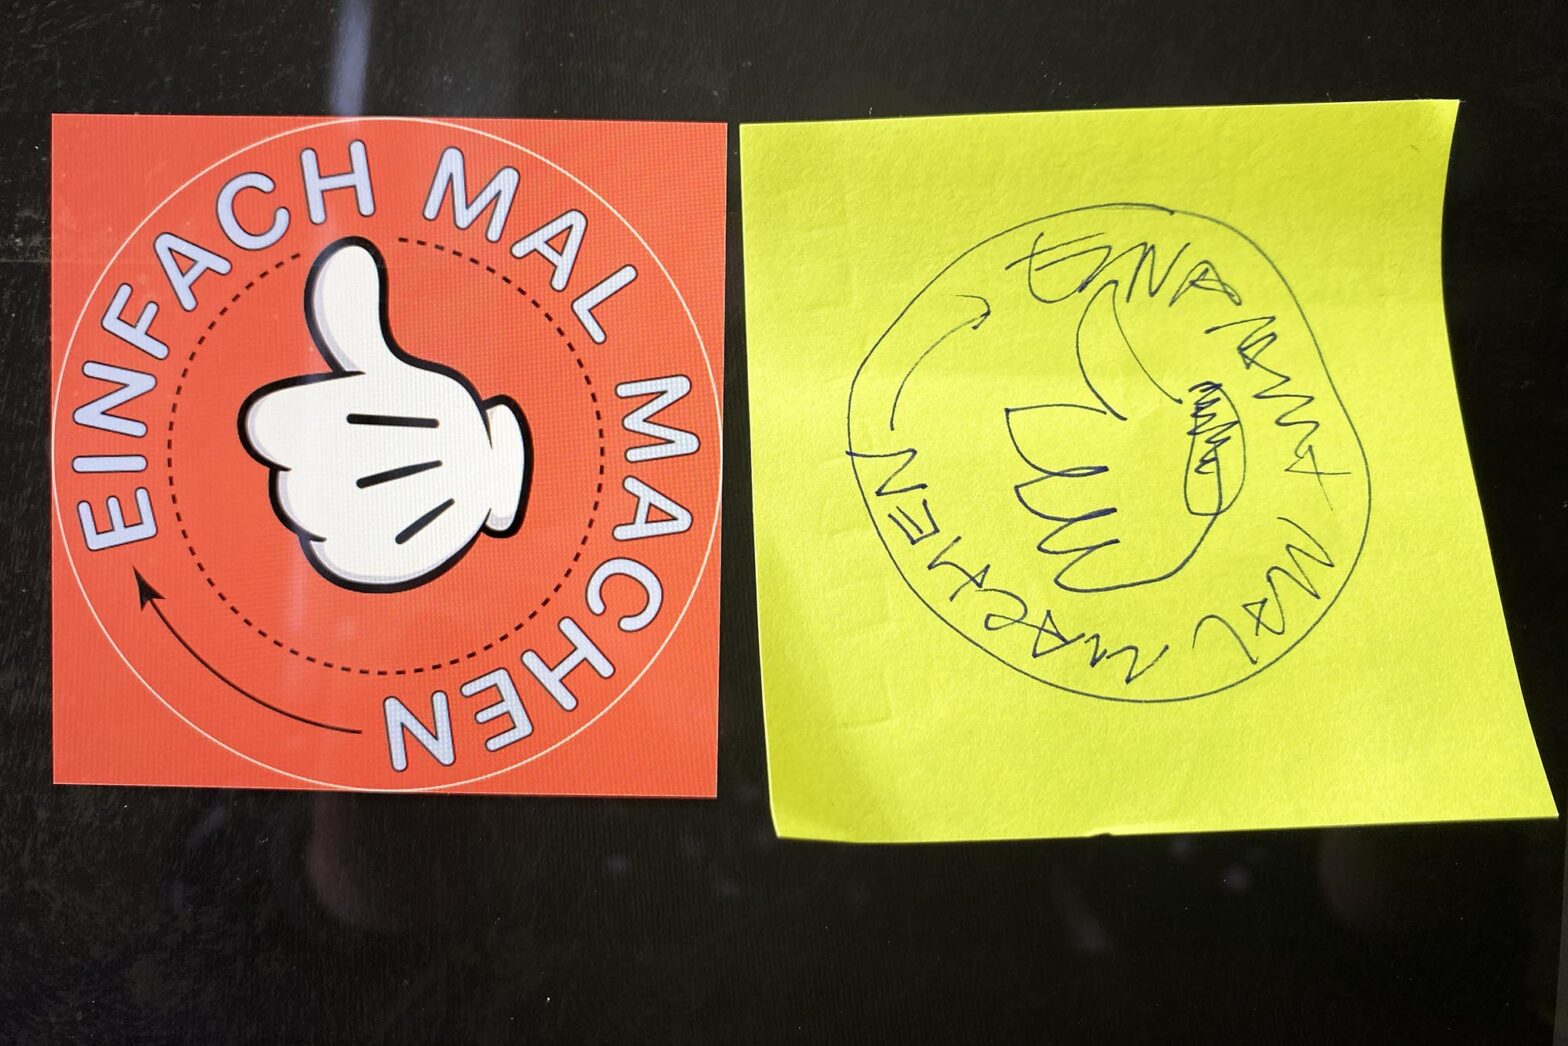 Two design versions of the same design next to each other: A Mickey Mouse-style hand showing thumbs up inside a circle – the letter around saying: Just do it in German